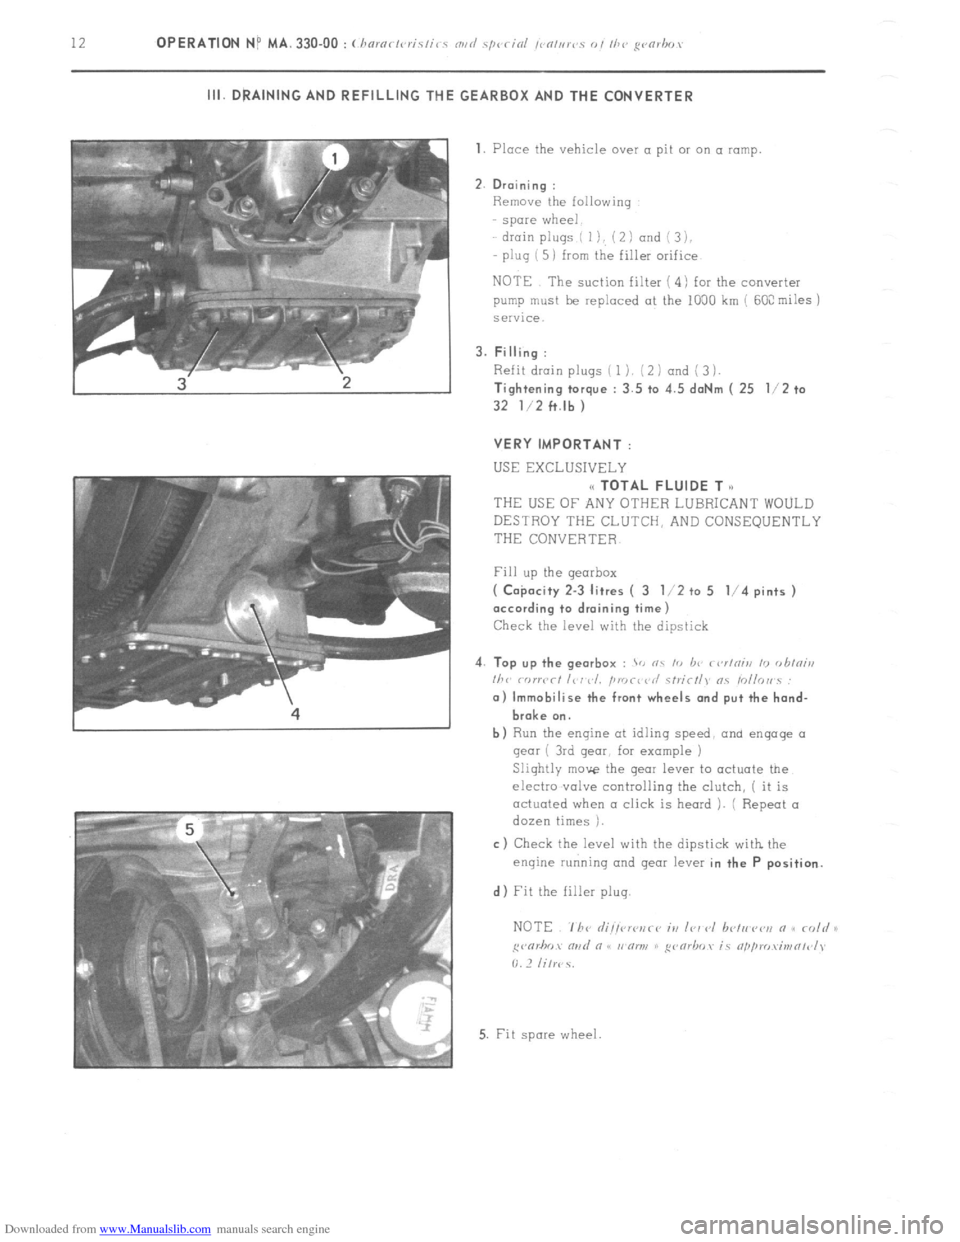 Citroen CX 1979 1.G Workshop Manual Downloaded from www.Manualslib.com manuals search engine 12 OPERATION NP MA. 330.00 : (haro</vr-is/i< c m,</ s/wcinl ,cn,i,rt~. o, I/>? gvmhr,, III. DRAINING AND REFILLING THE GEARBOX AND THE CONVERTE